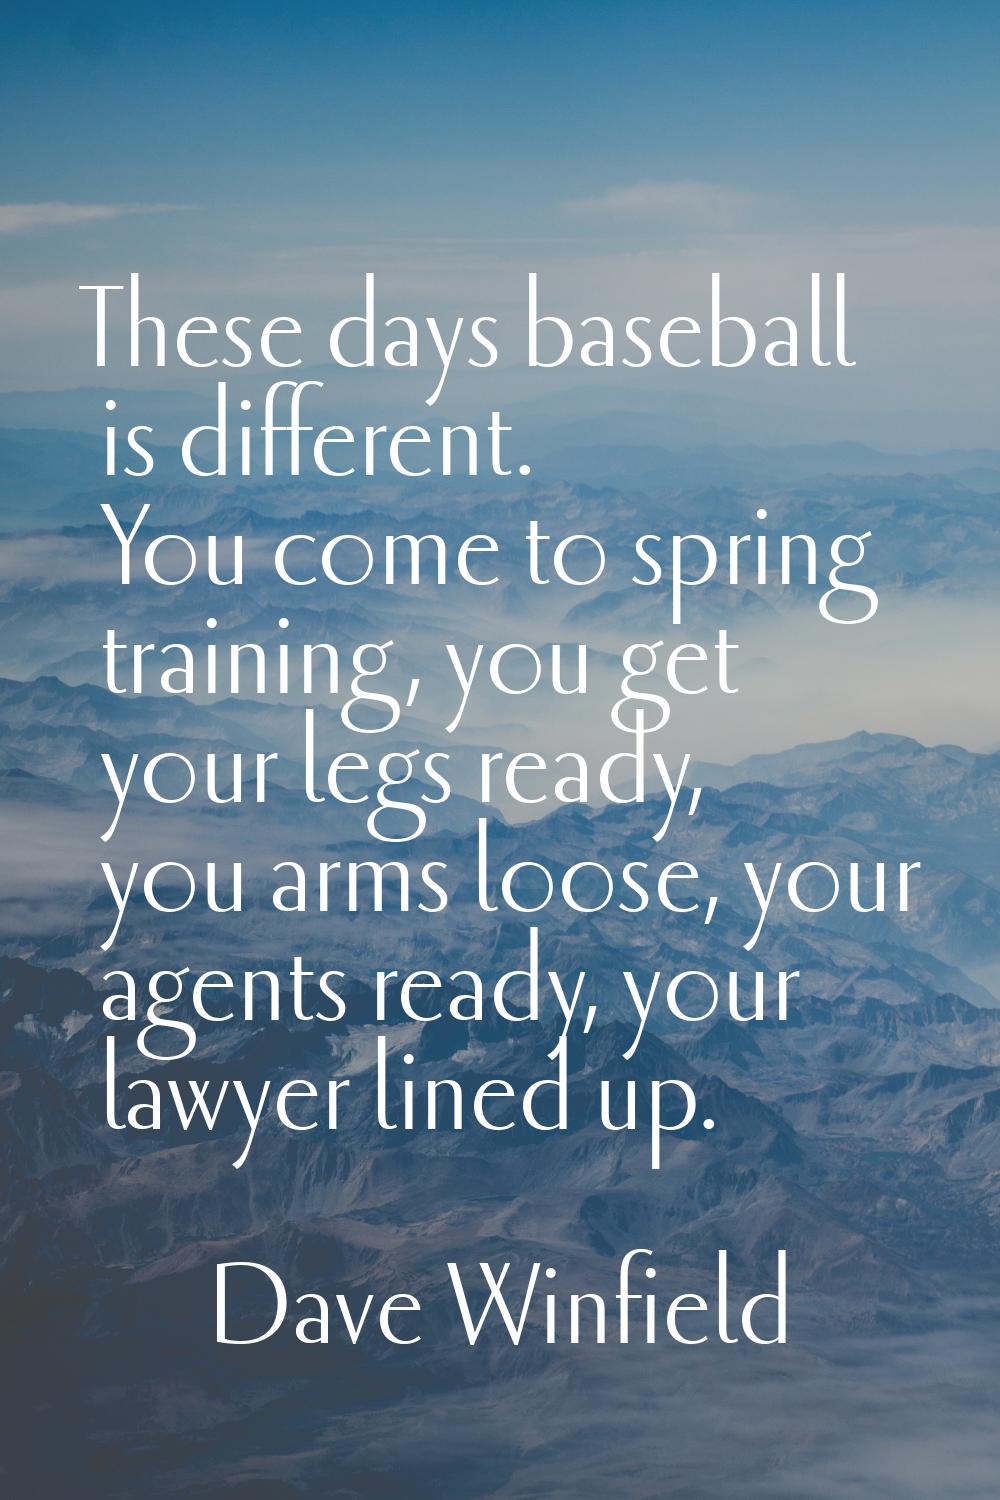 These days baseball is different. You come to spring training, you get your legs ready, you arms lo